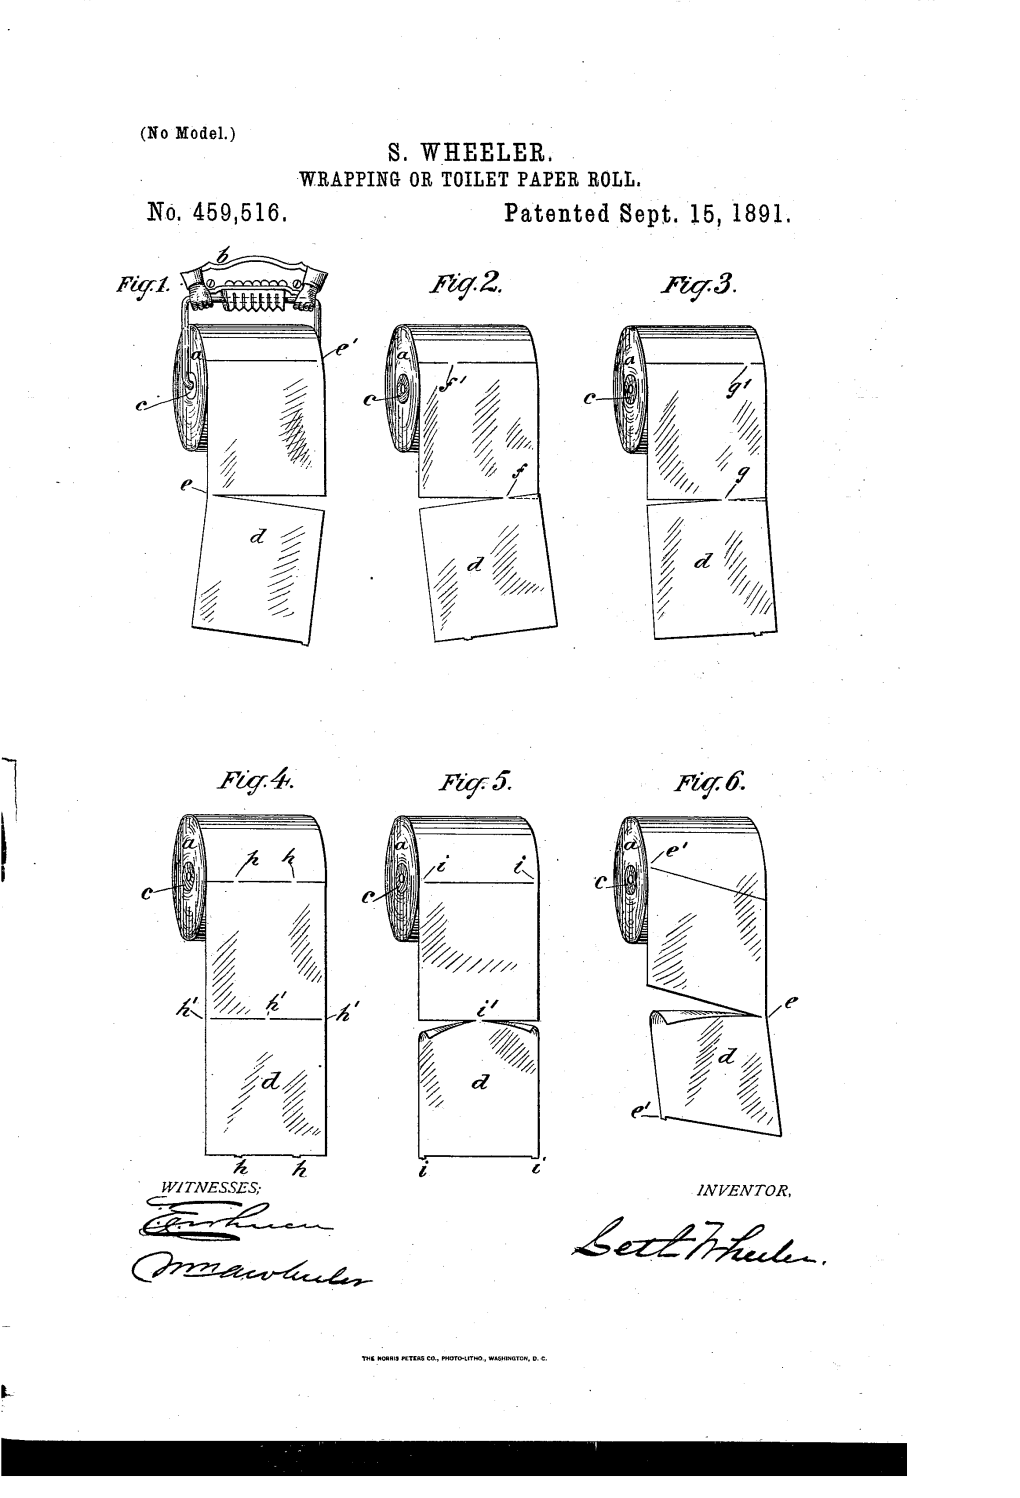 Patented Sept. 15, 1891